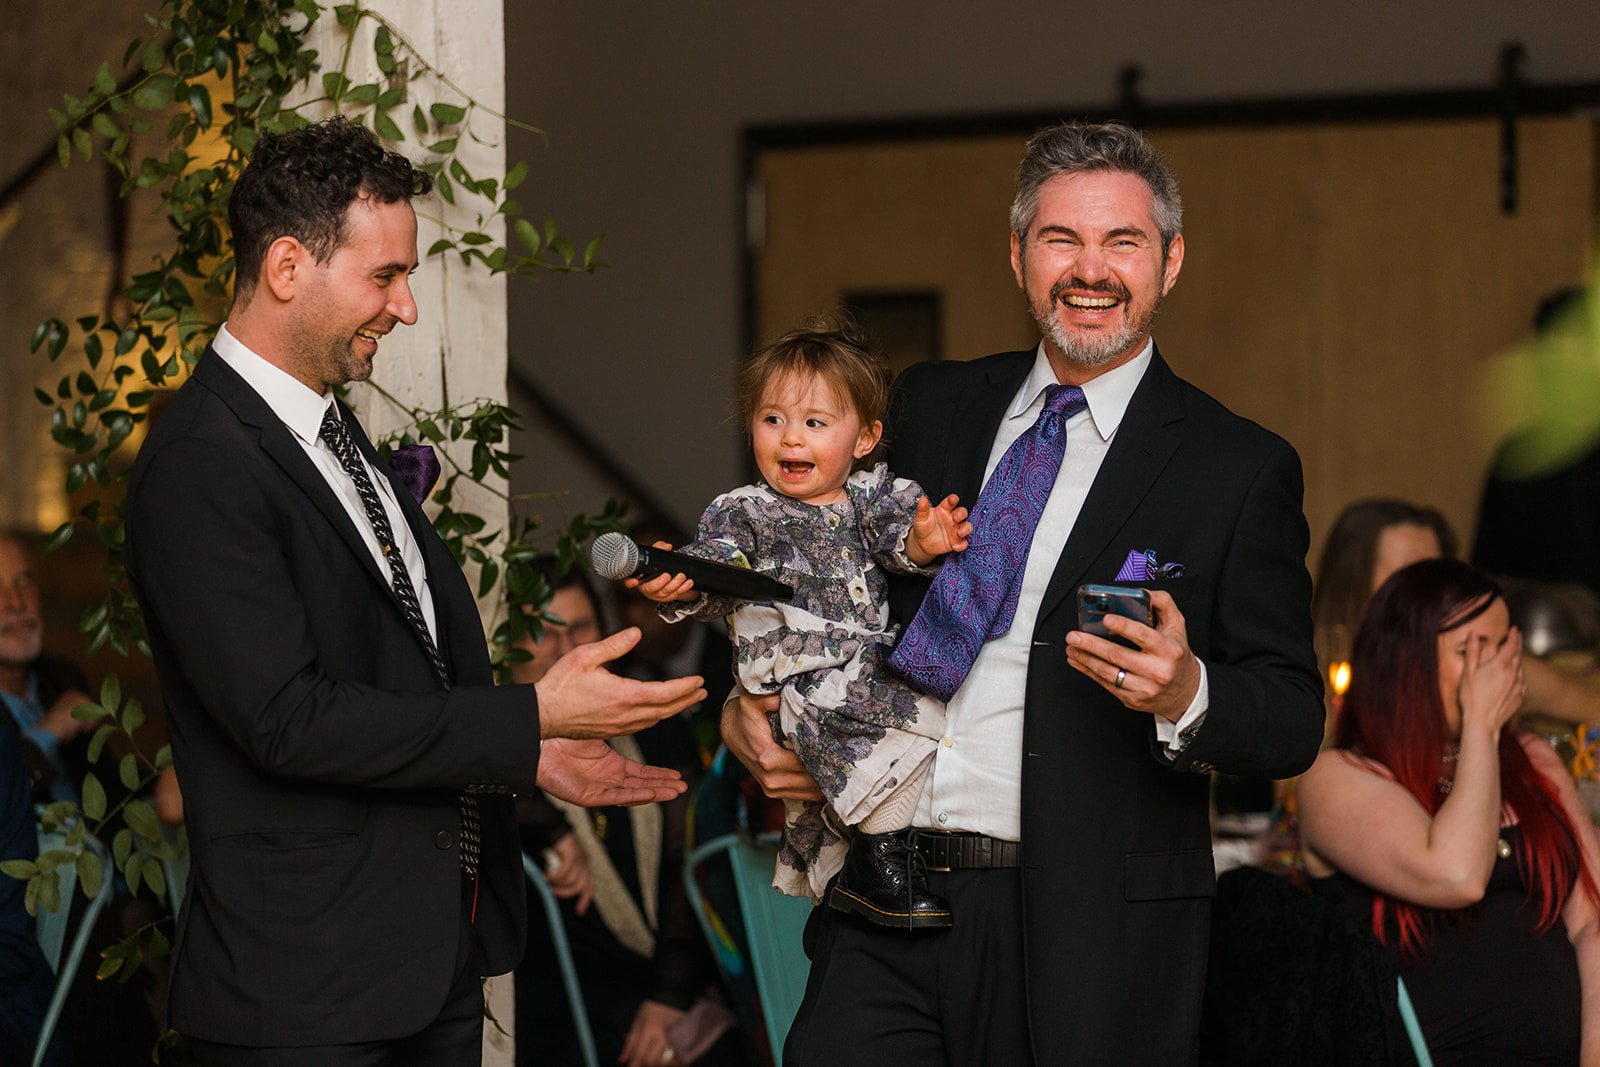  Documentary candid photo of bride’s brothers and niece giving a toast during the reception at nontraditional Jewish and Venezuelan wedding at The Joinery Chicago an Industrial loft wedding venue In Logan Square.  